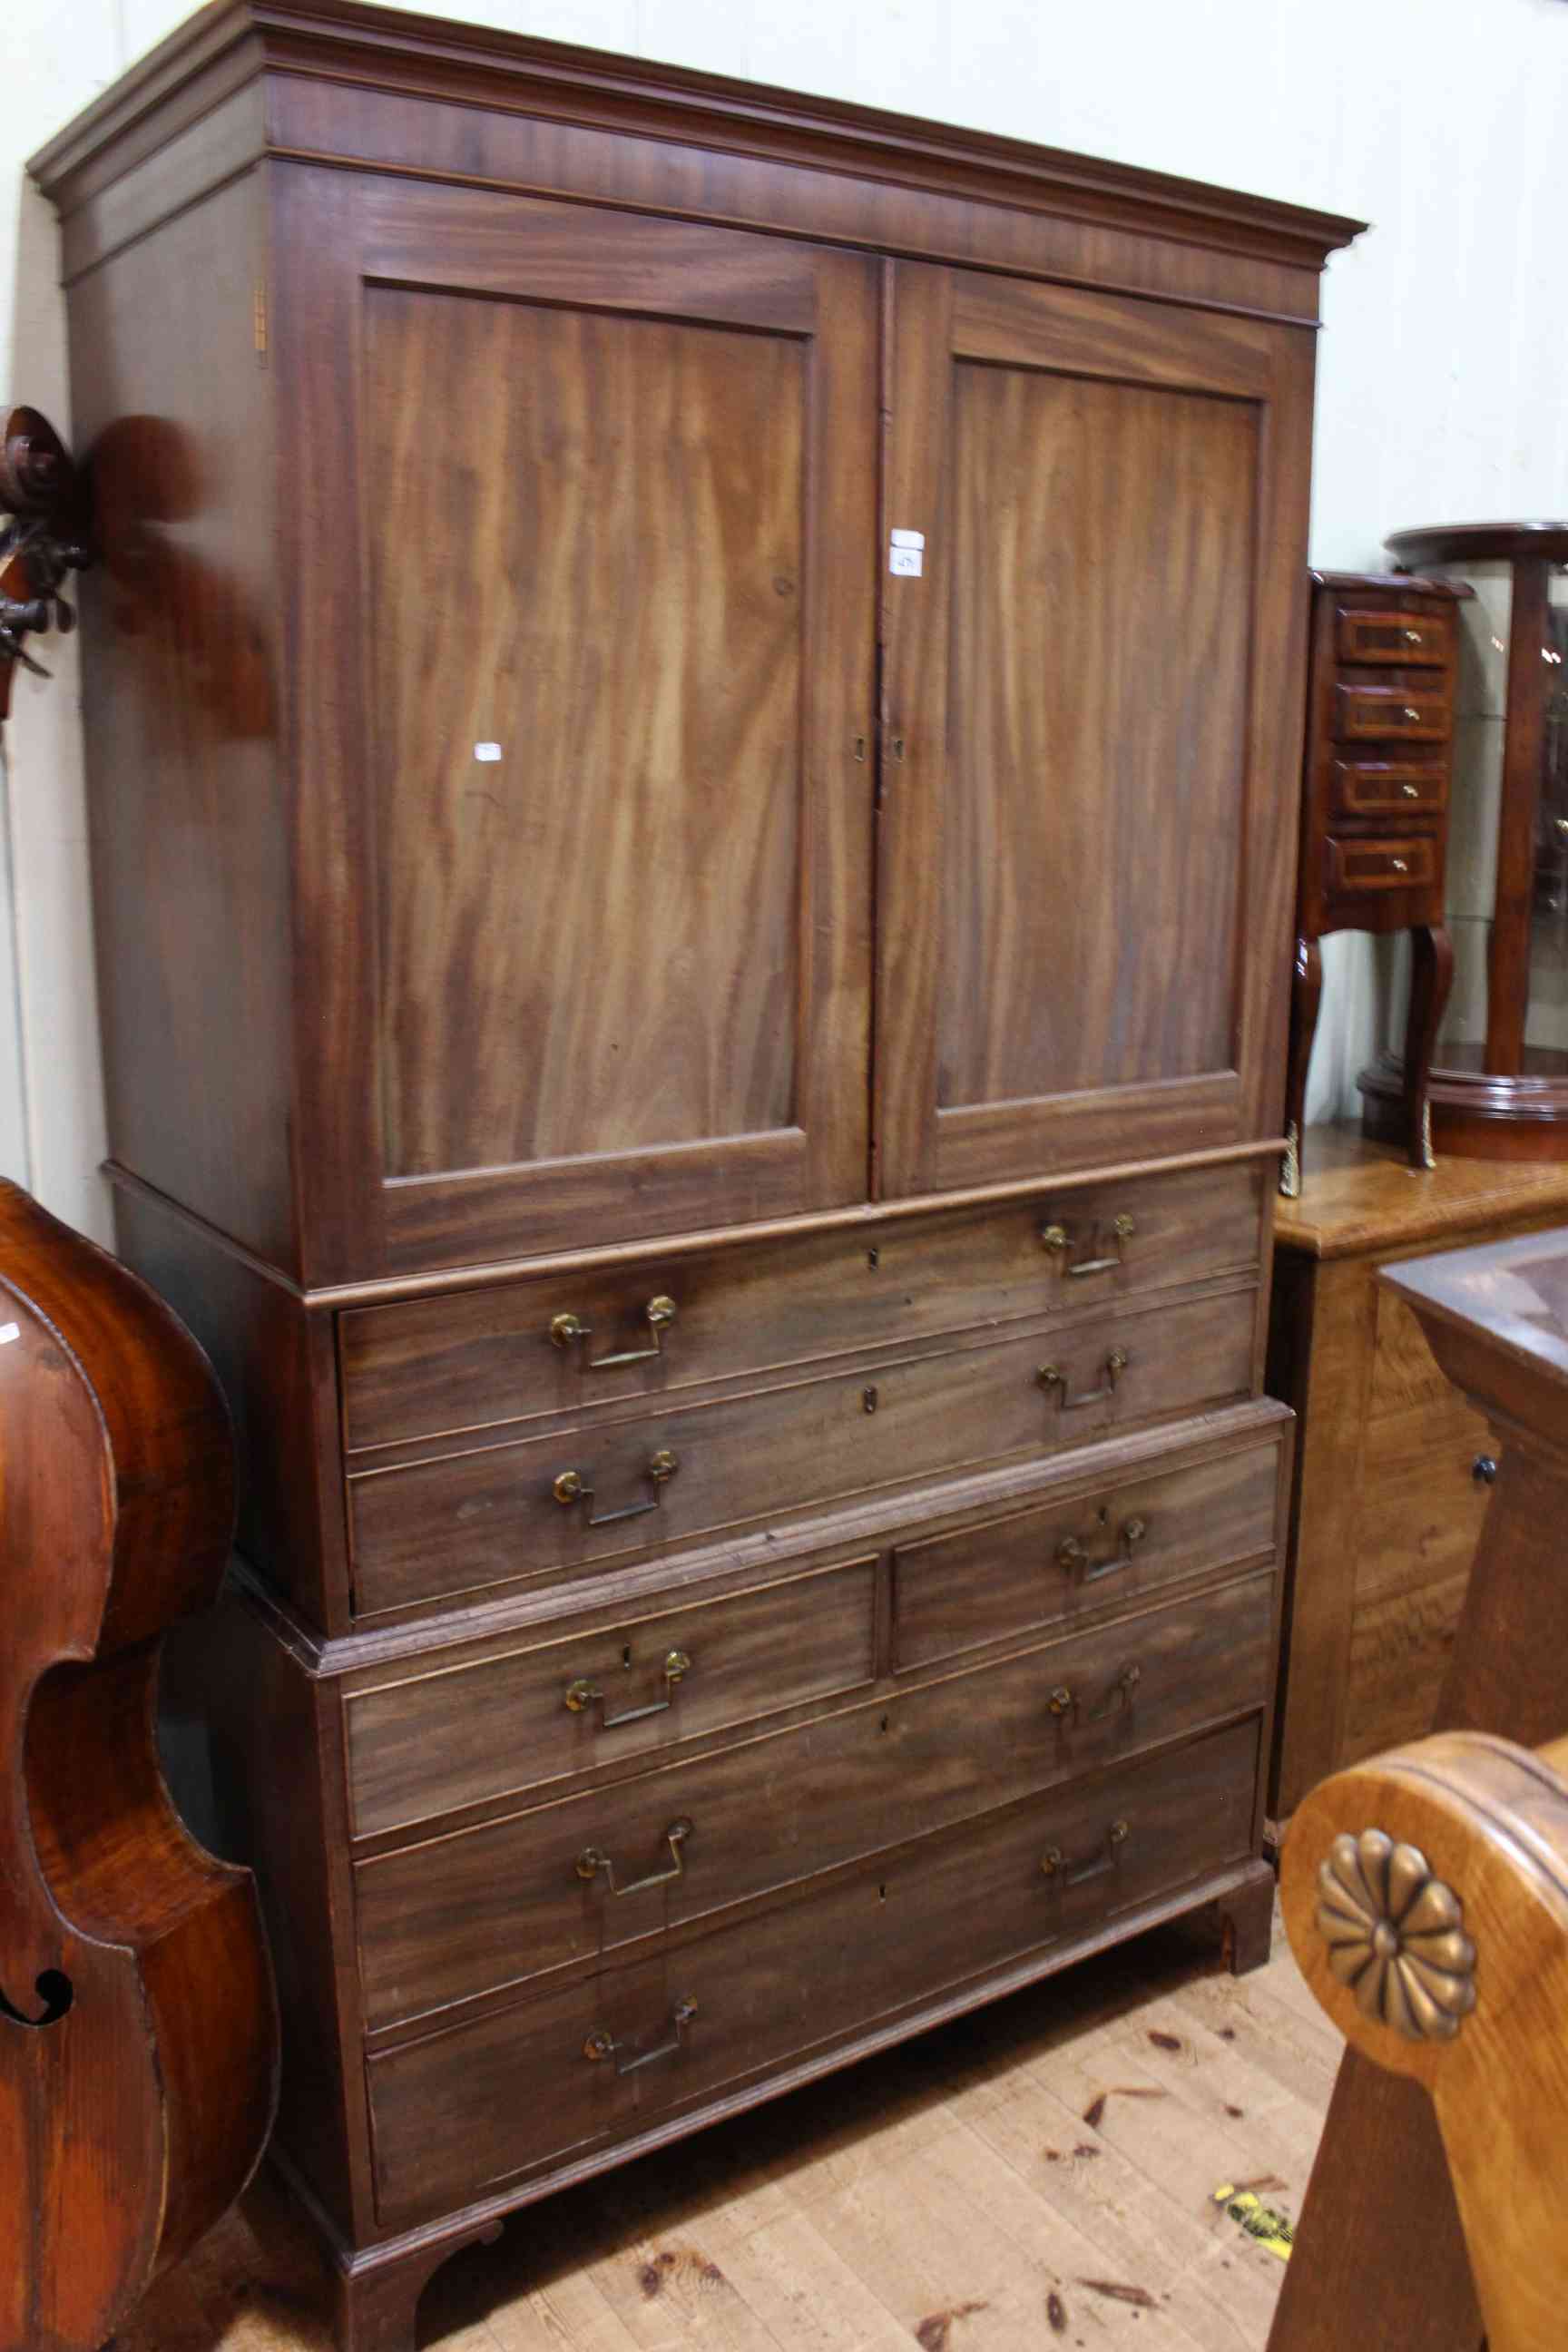 Victorian mahogany secretaire linen press having two panelled doors above a secretaire drawer with